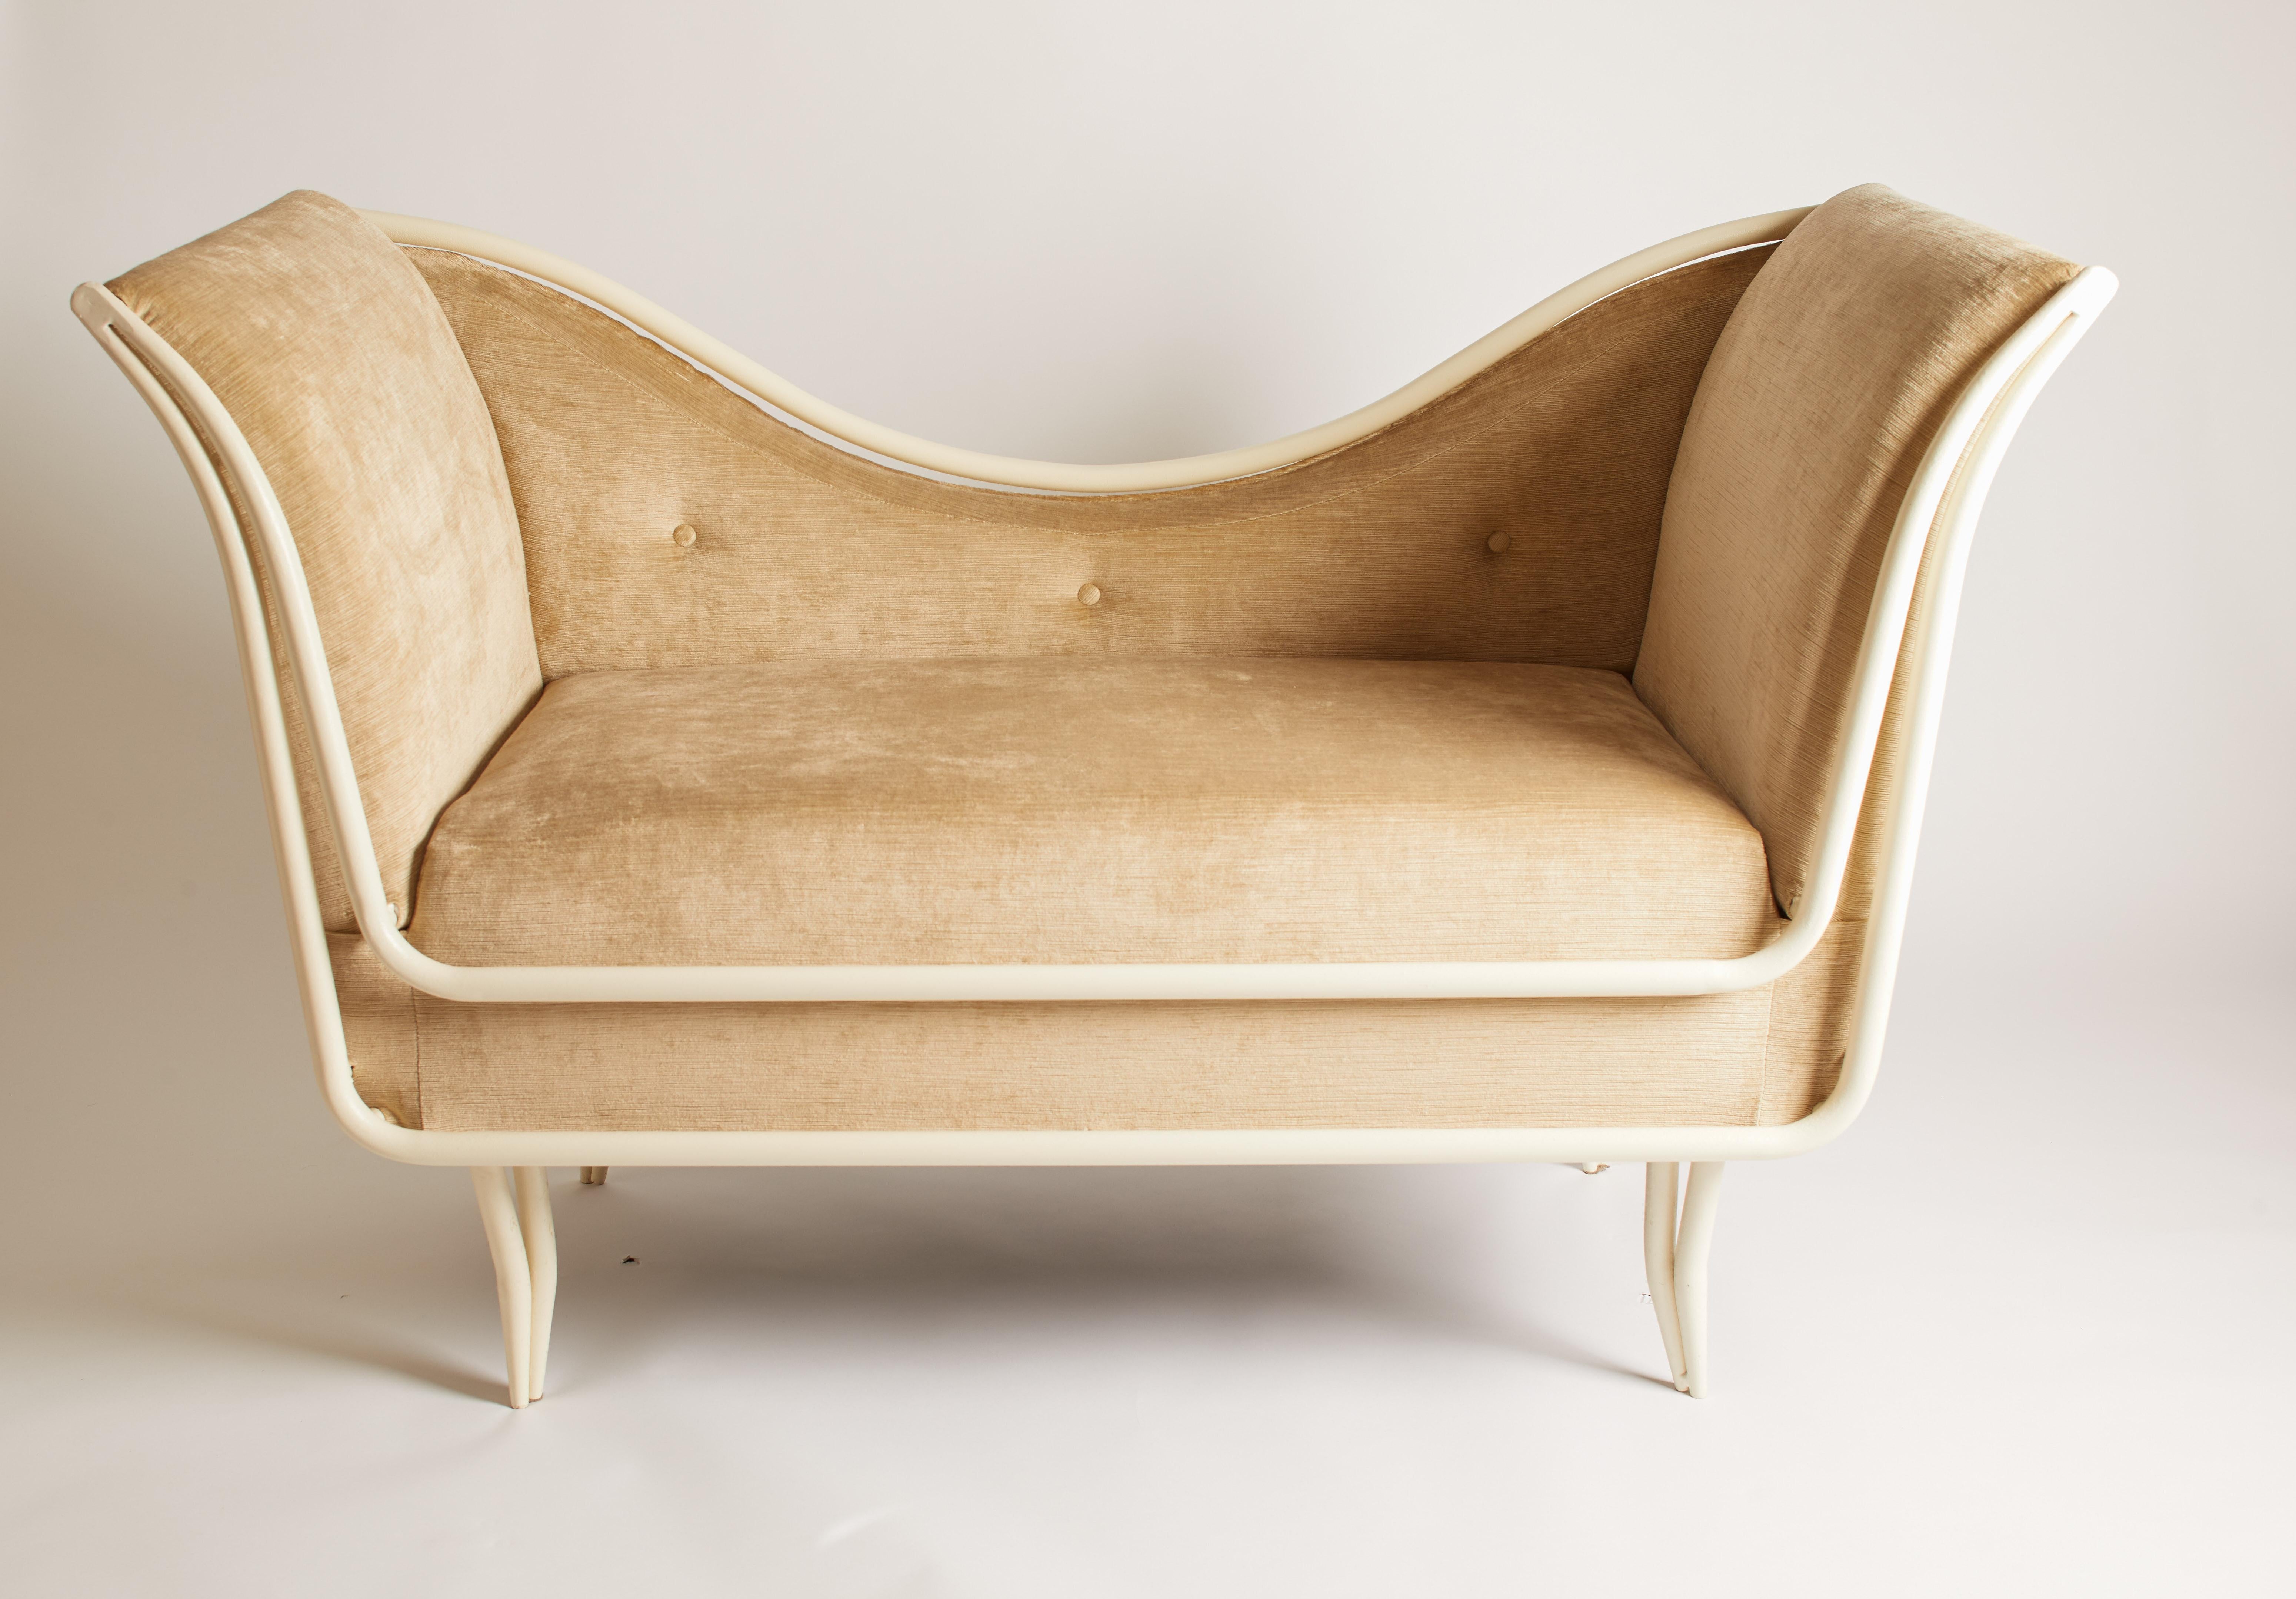 Restored 1960s Italian antique white and beige upholstered and painted metal settee.